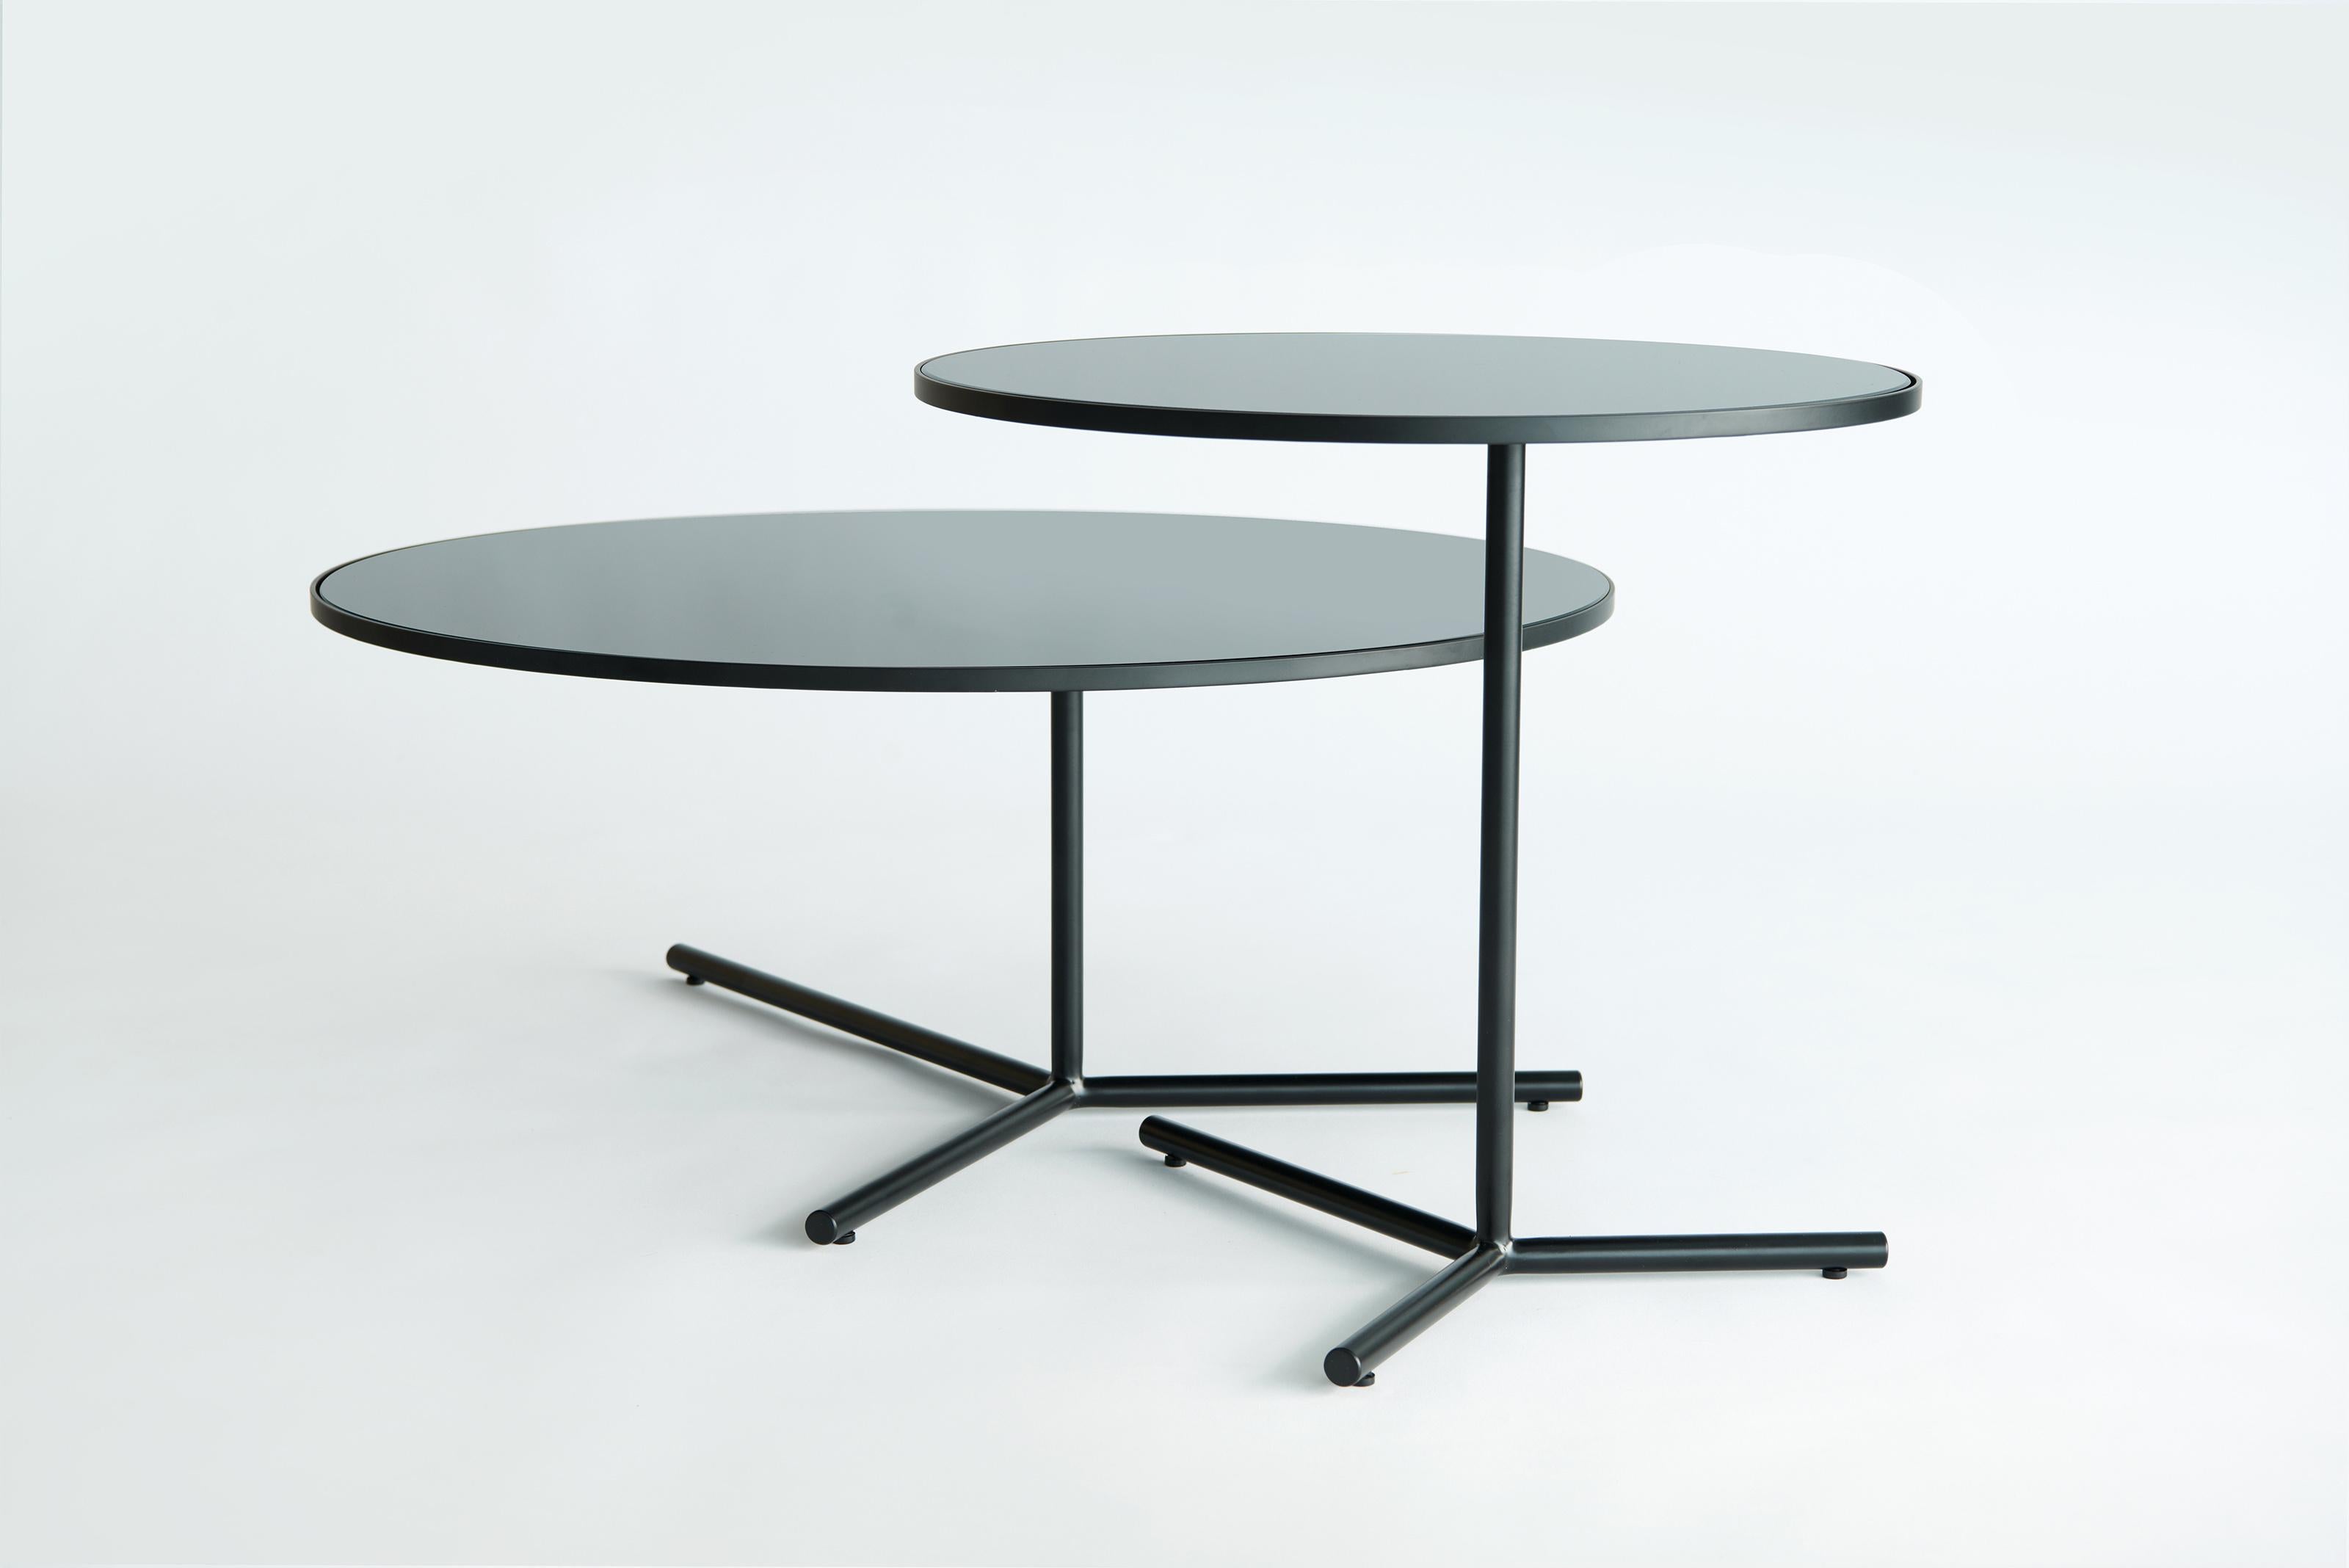 Set Of 2 Downtown Tables by Phase Design
Dimensions: Large: Ø 76,2 x H 30,5 cm. 
Medium: Ø 50,8 x H 45,7 cm. 
Materials: Spandrel glass and powder-coated steel.

Solid steel base available in flat or gloss black and white powder coat, polished